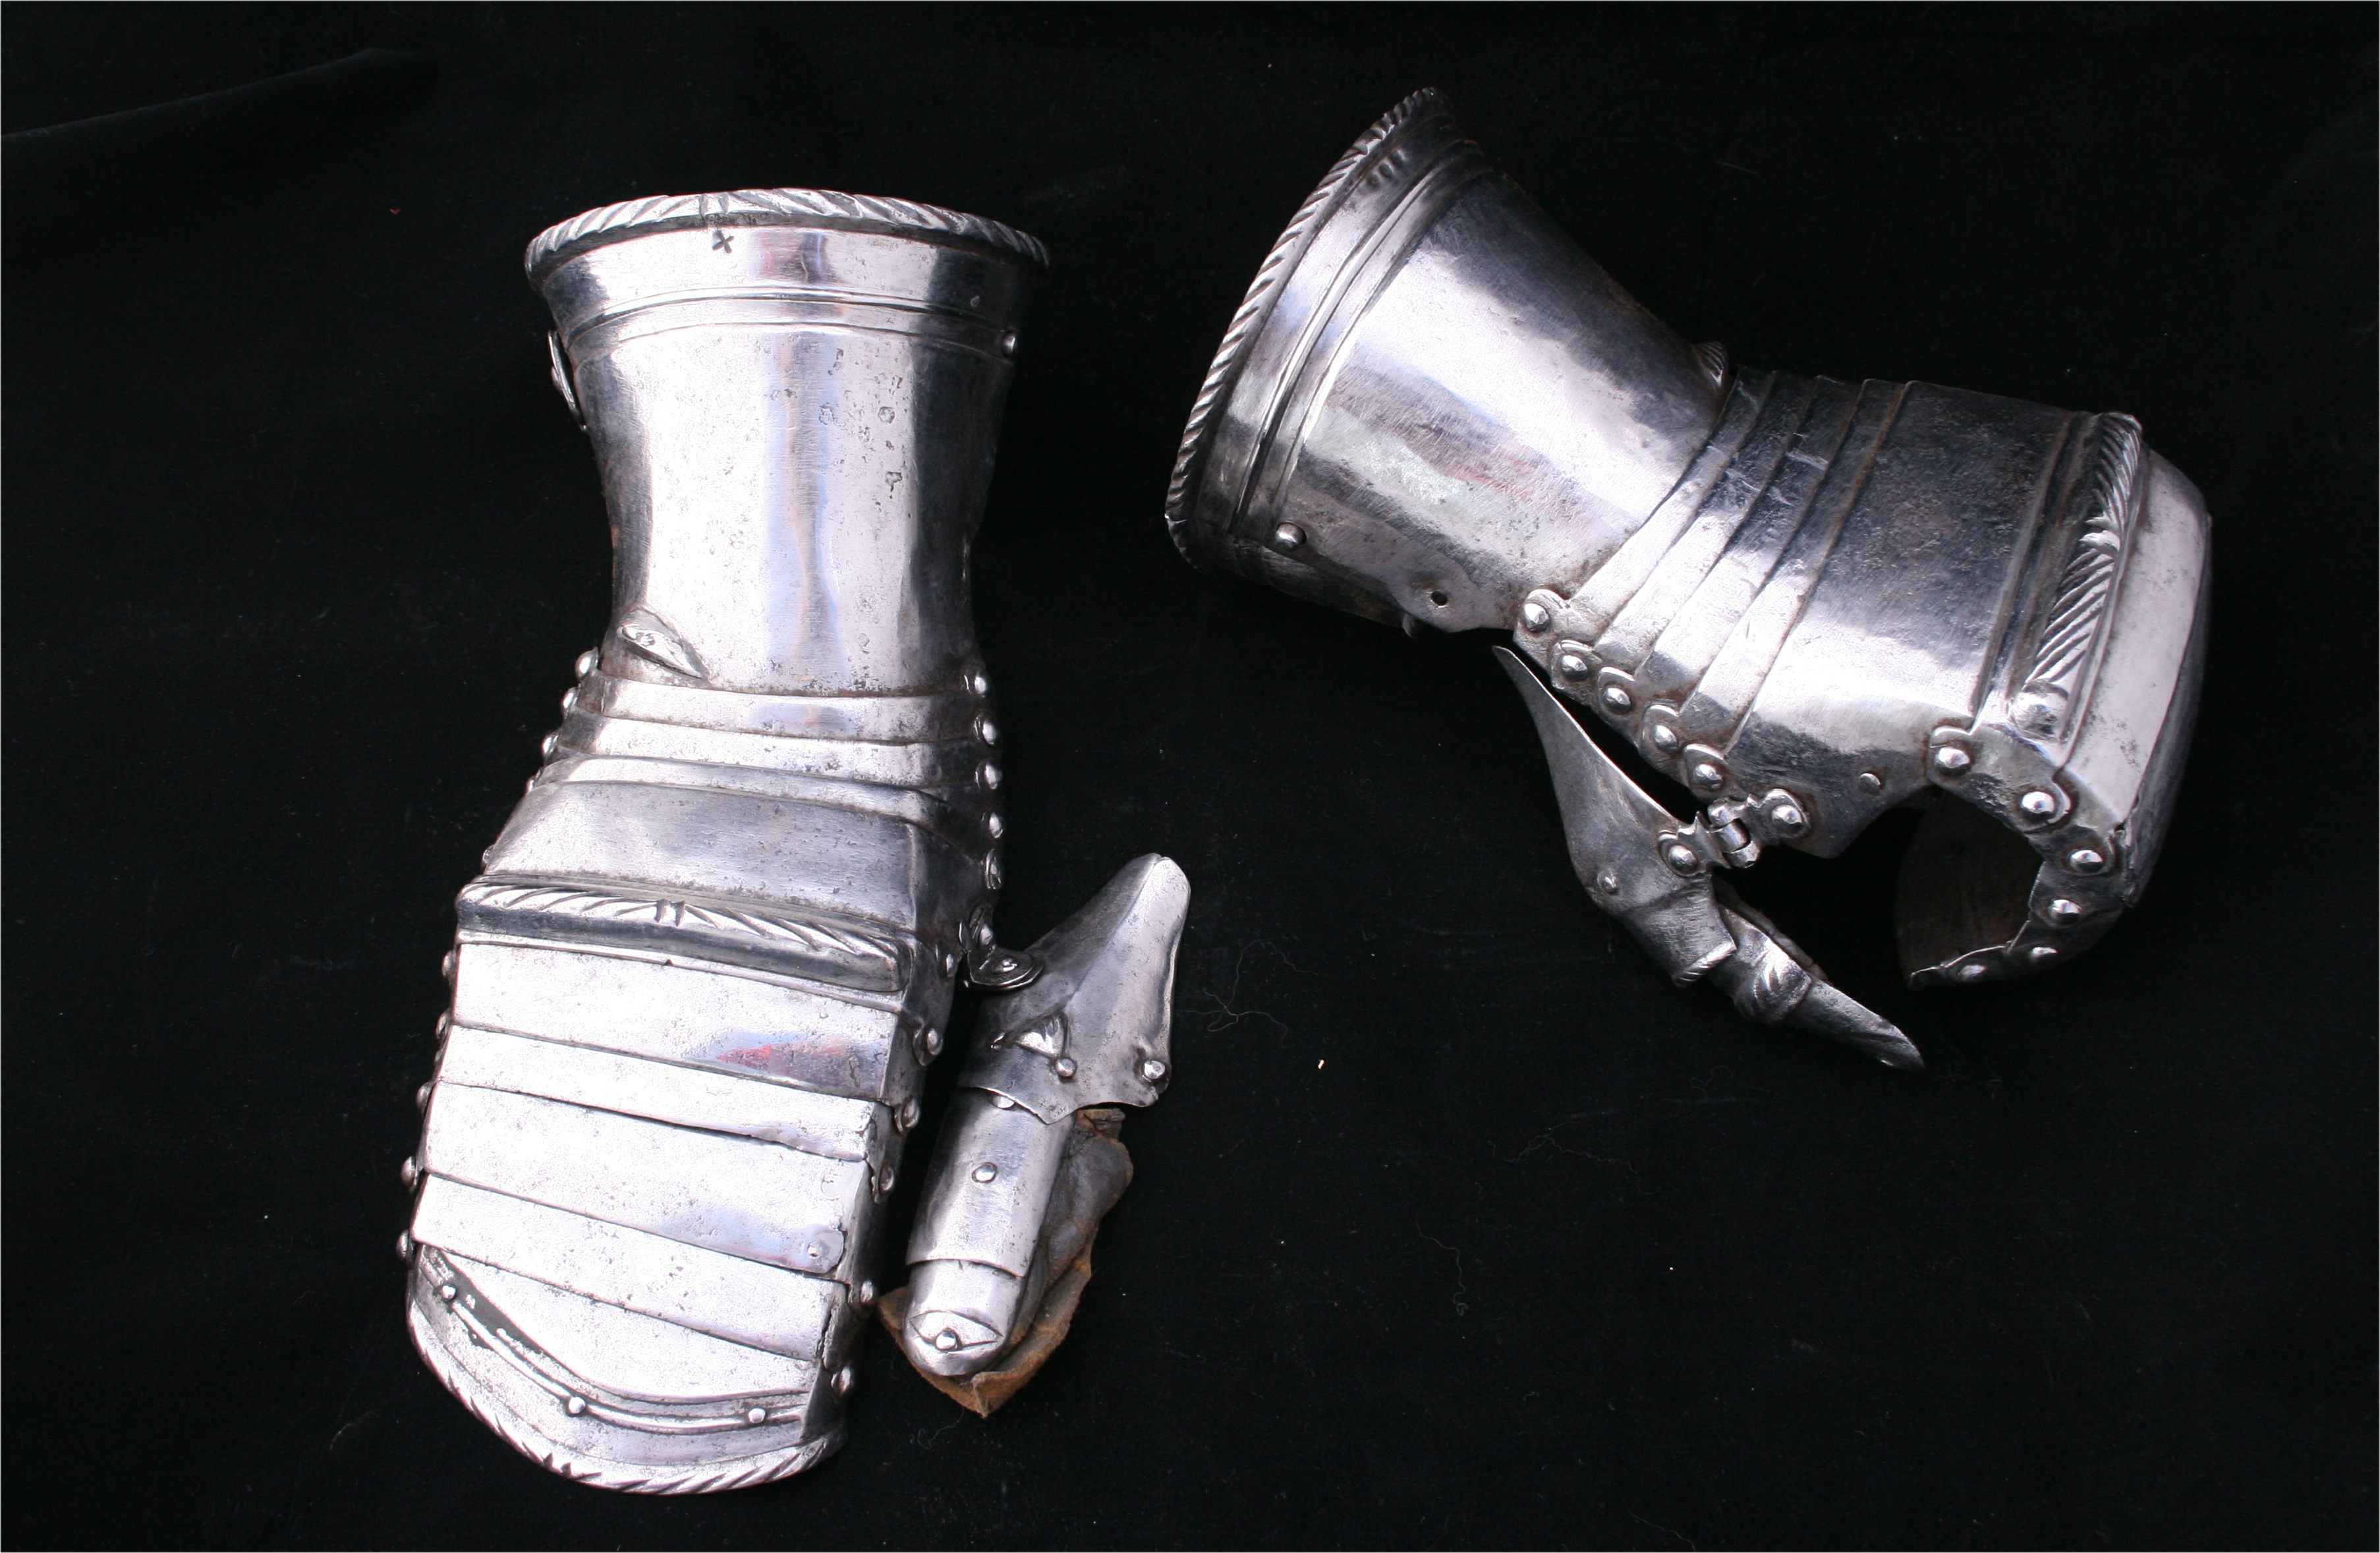 2 Gauntlets - A-104-pair-one-bent